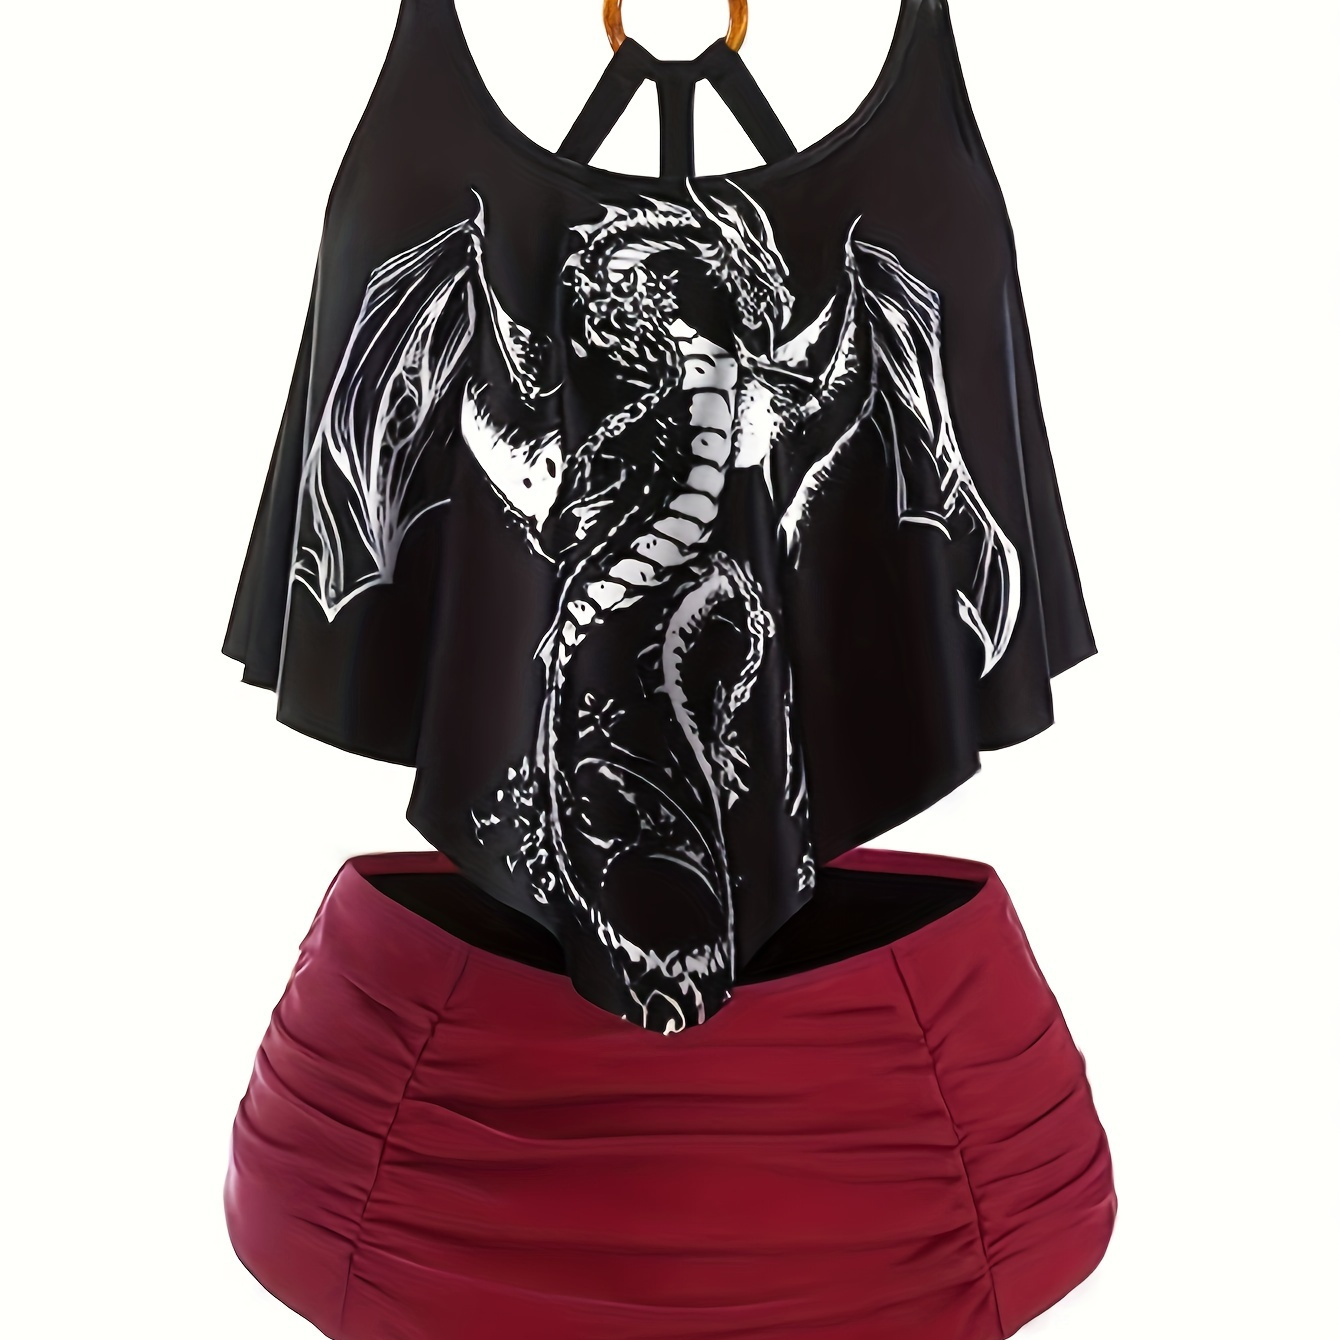 

Dragon Print Ring Strappy Black & Burgundy Red 2 Piece Set Tankini, High Waist Ruched Ruffle Hanky Tummy Control Swimsuits, Gothic Halloween Costumes, Women's Swimwear & Clothing